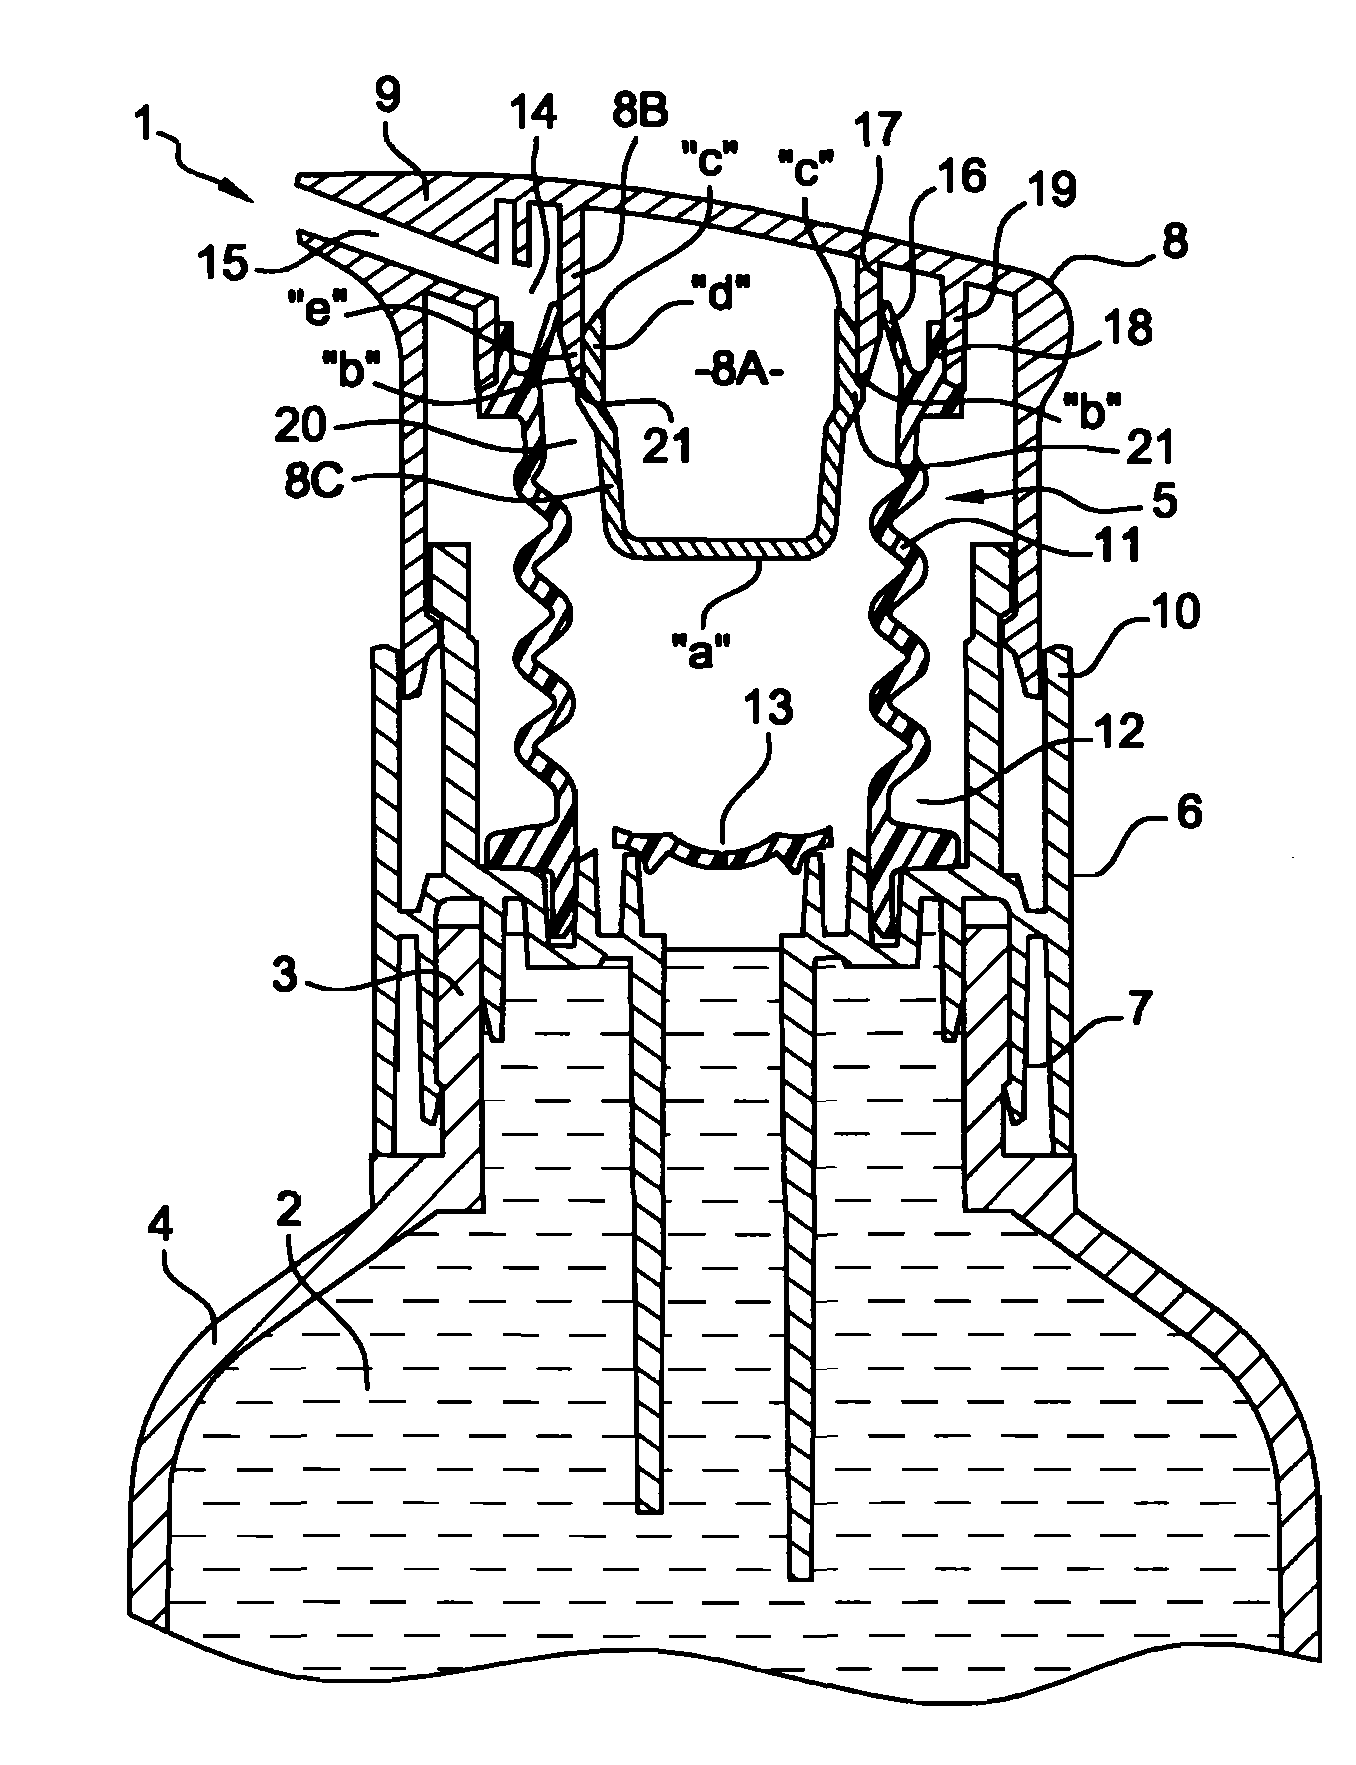 Device for dispensing a liquid-to-pasty product using a metering pump having a low dead volume